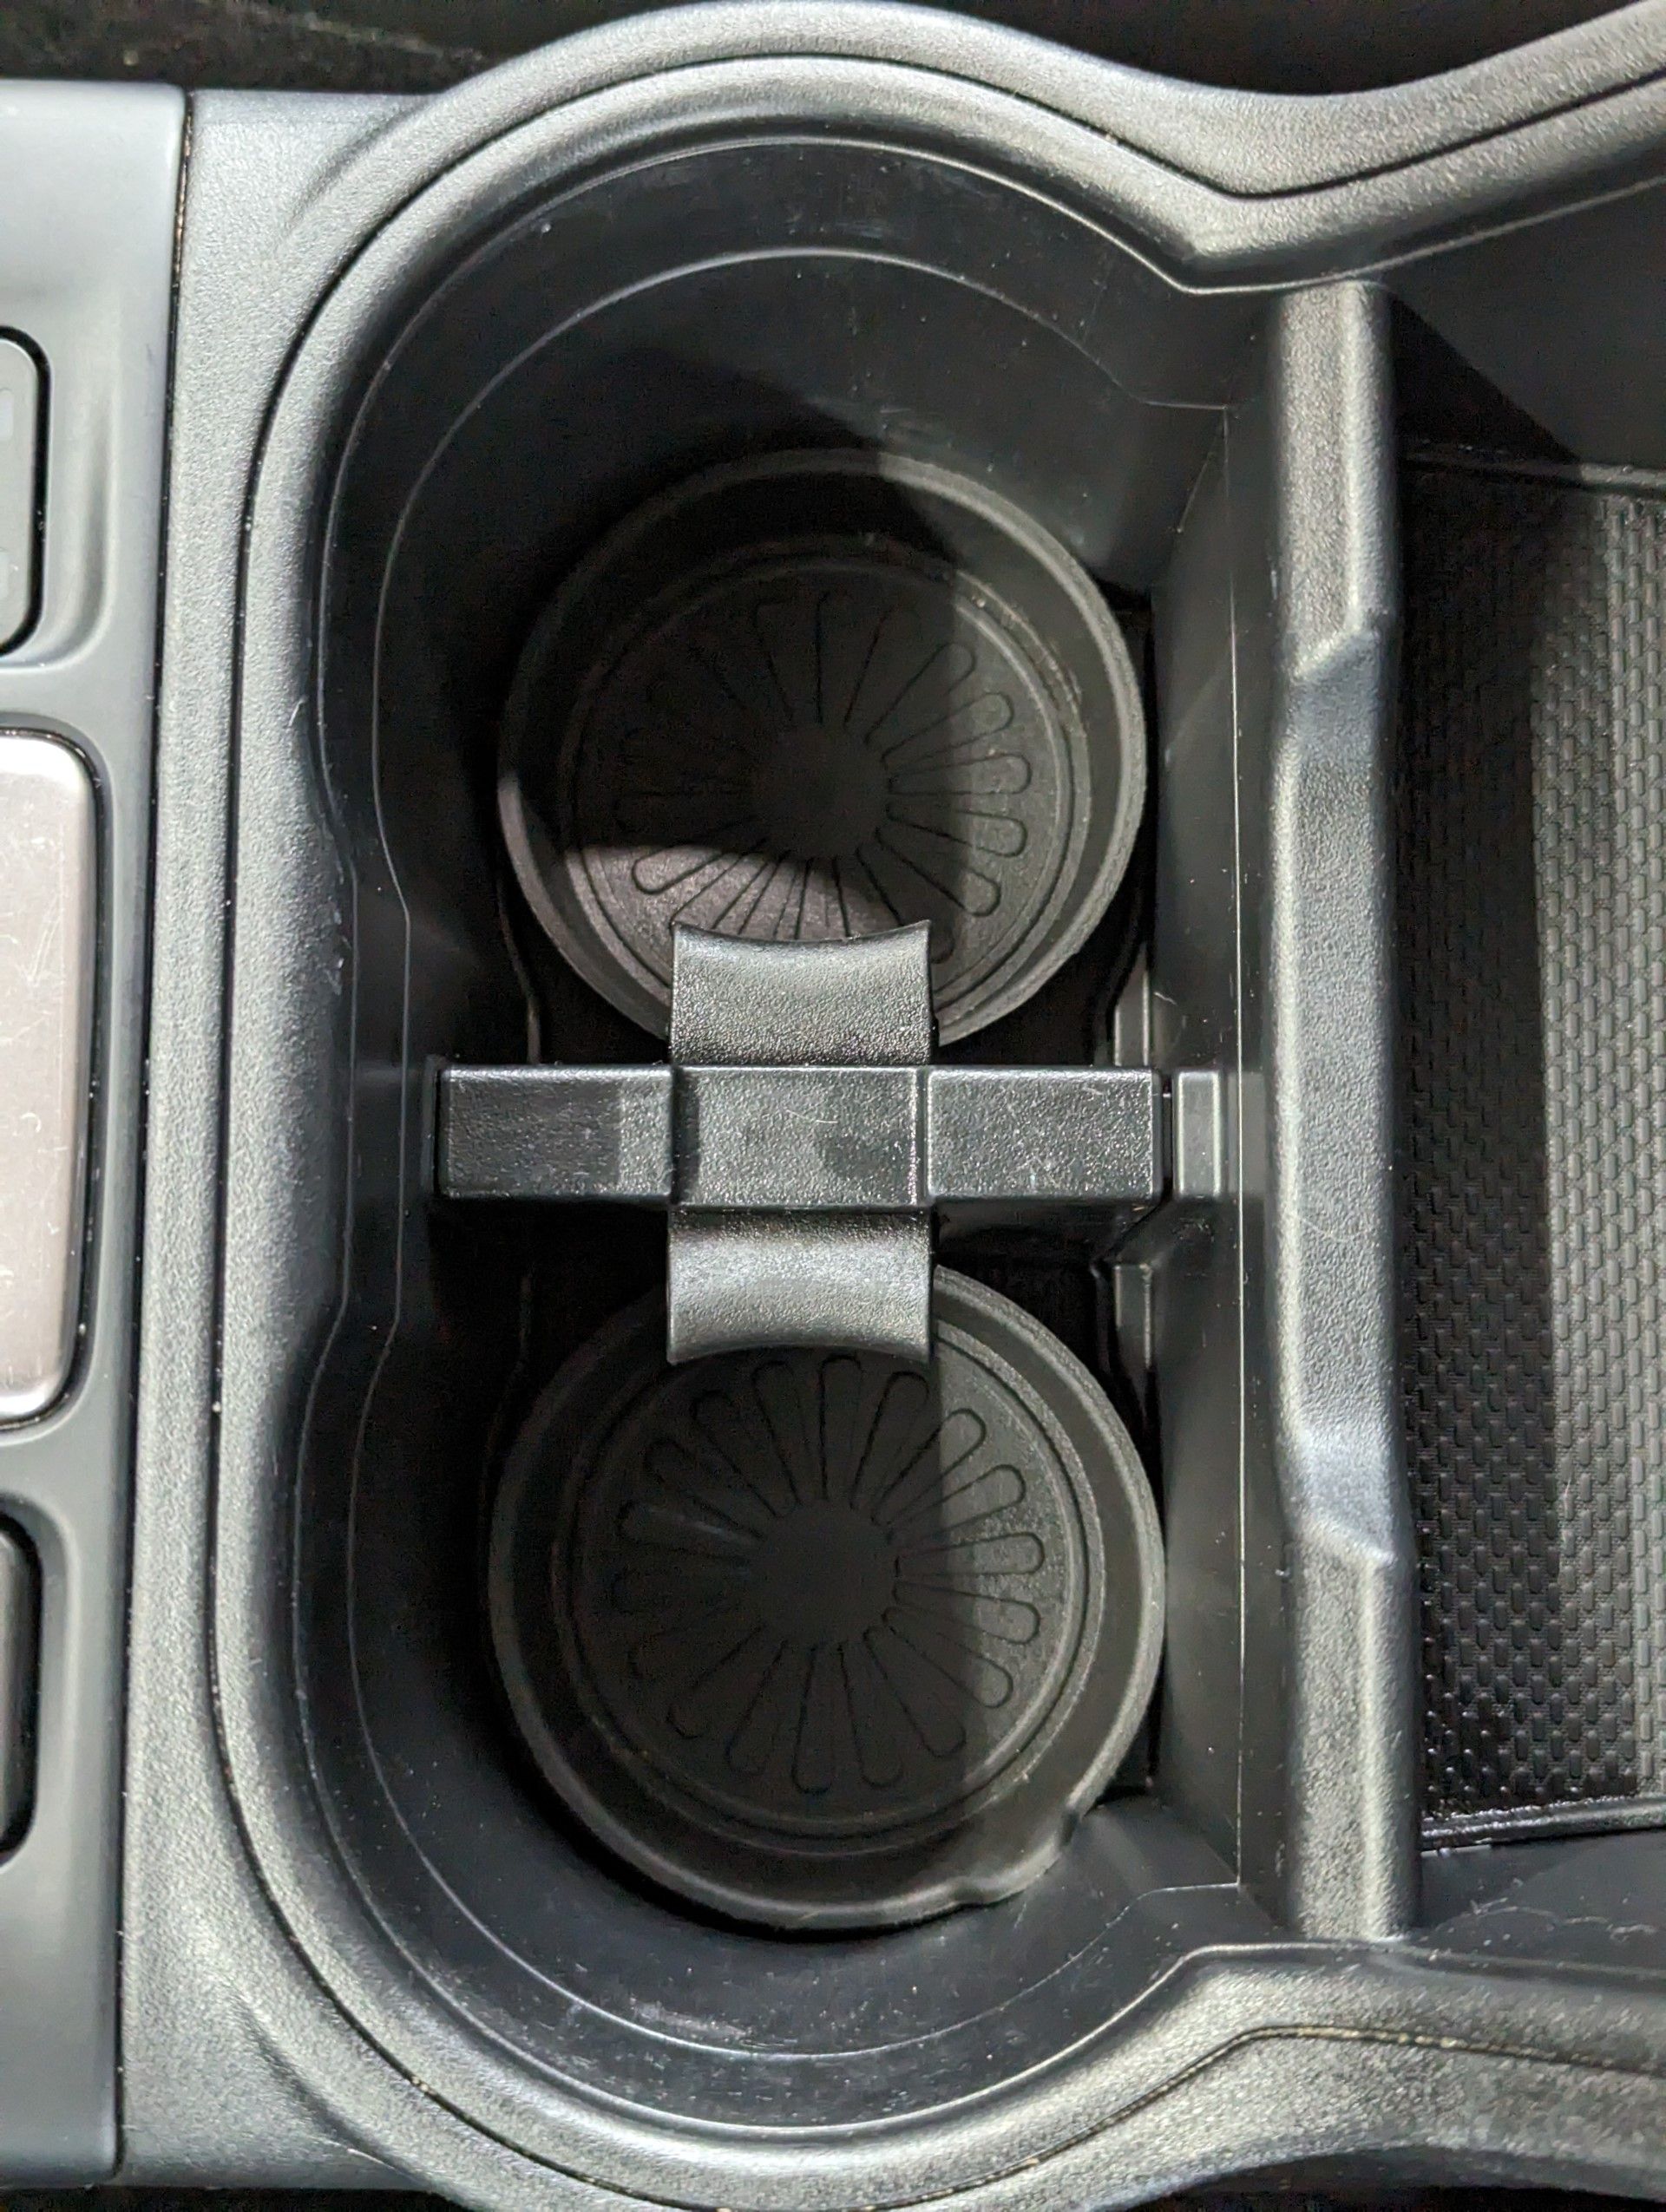 After Interior Detailing - A close up of a cup holder in a car with two cups in it .